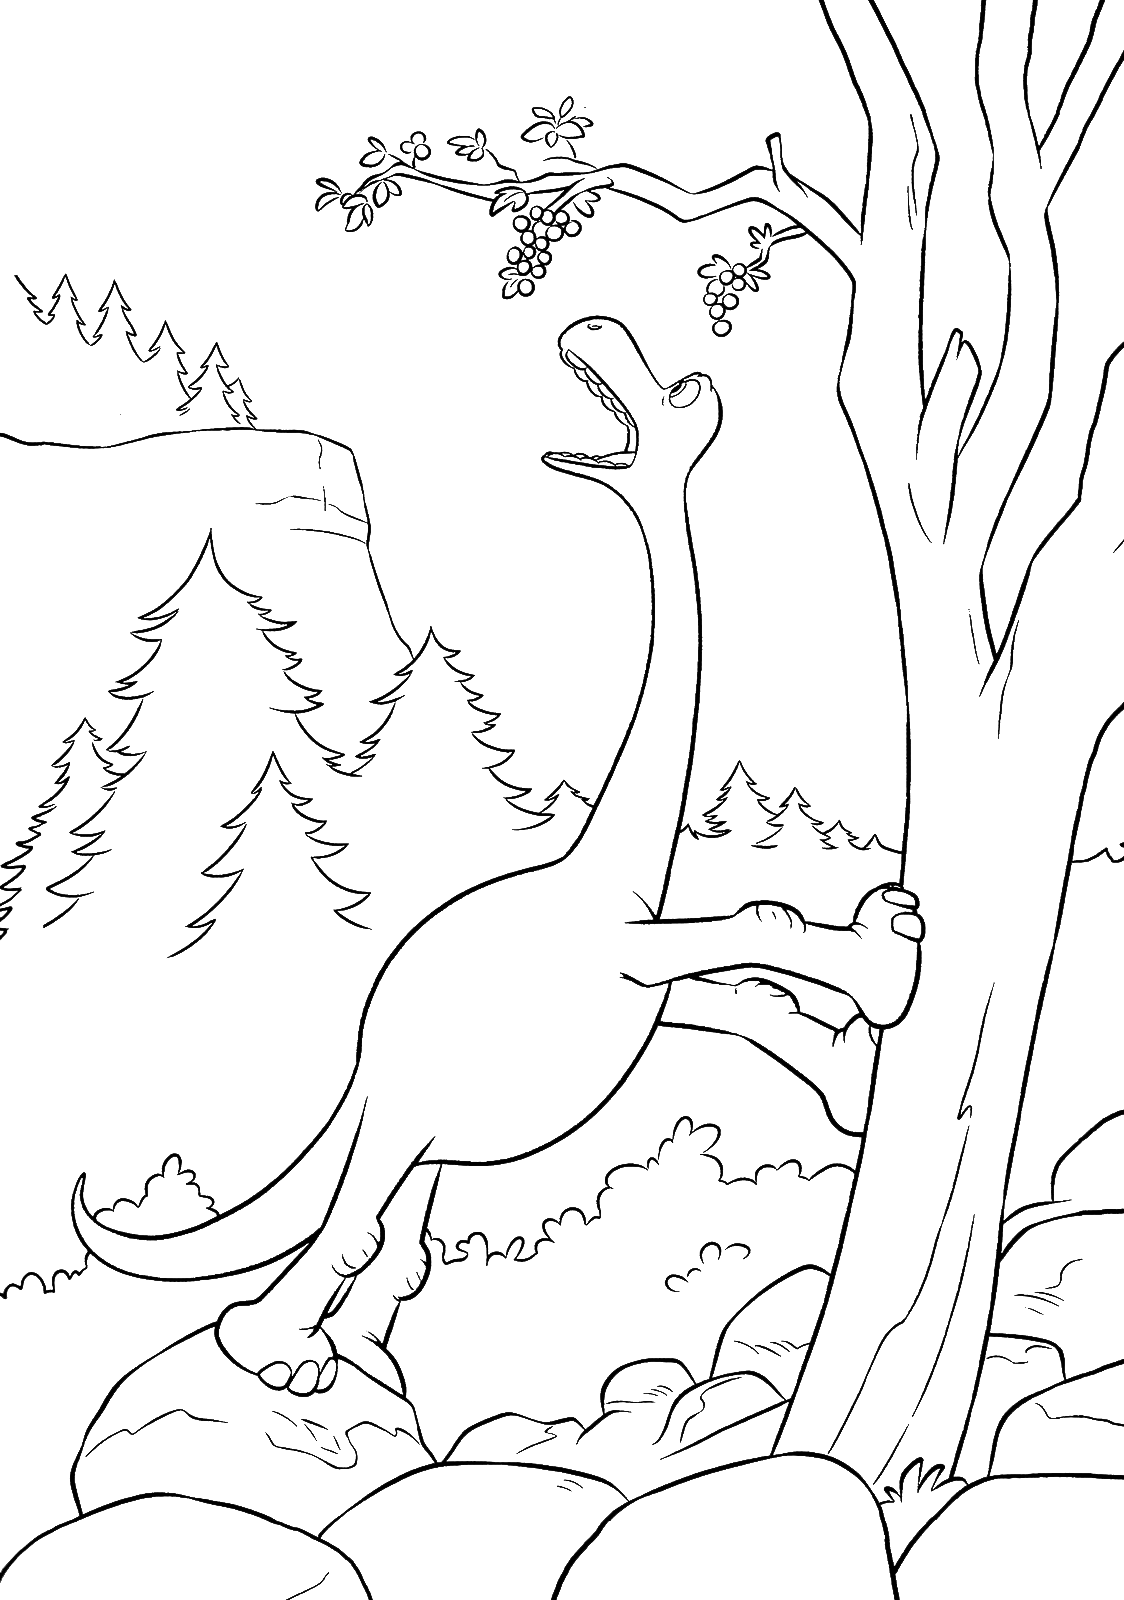 The Good Dinosaur coloring page - Arlo tries to eat berries on a tree. 